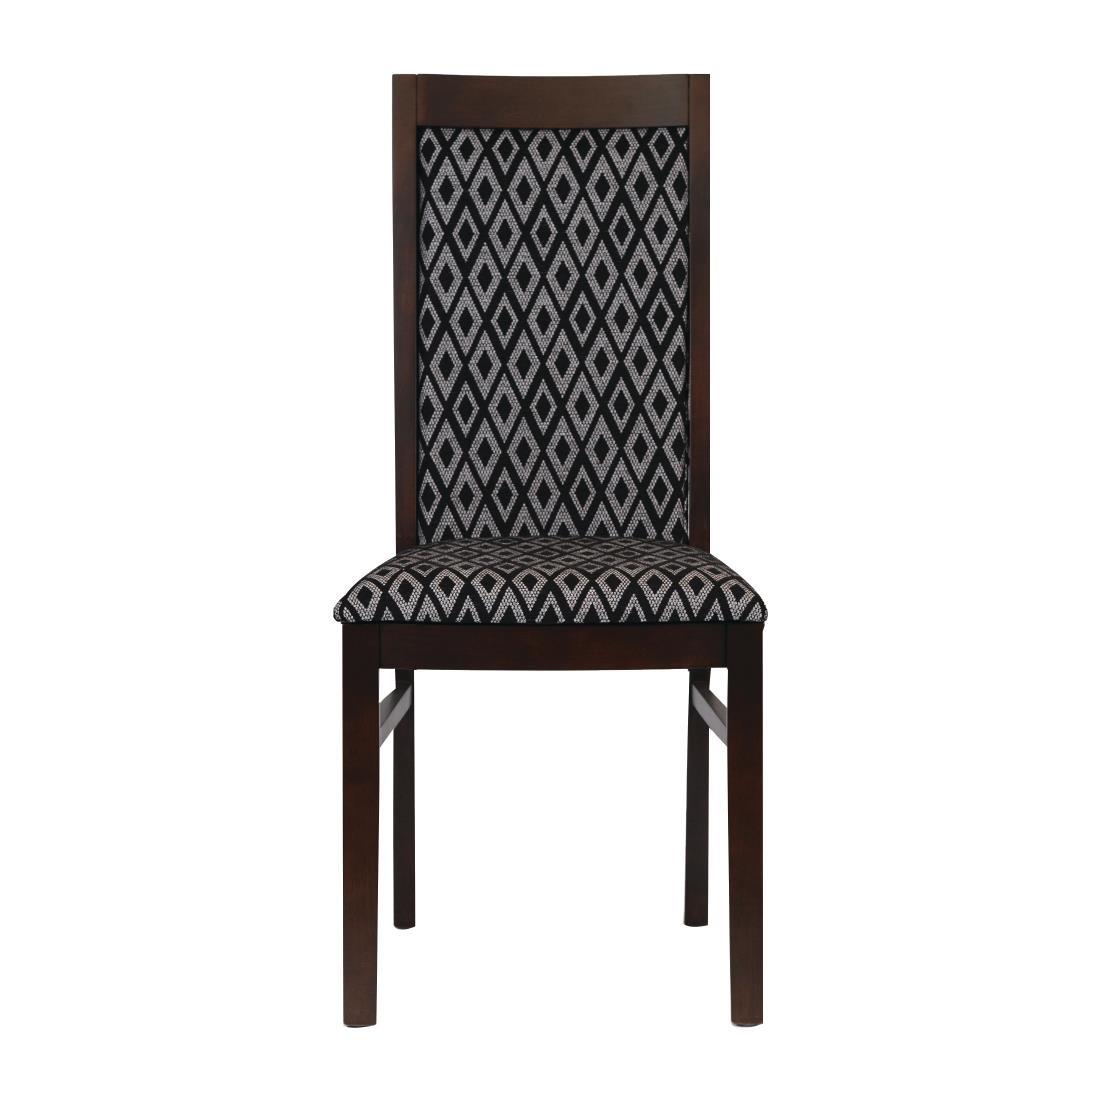 Brooklyn Padded Back Dark Walnut Dining Chair with Blue Diamond Padded Seat and Back (Pack of 2) - FT414  - 2